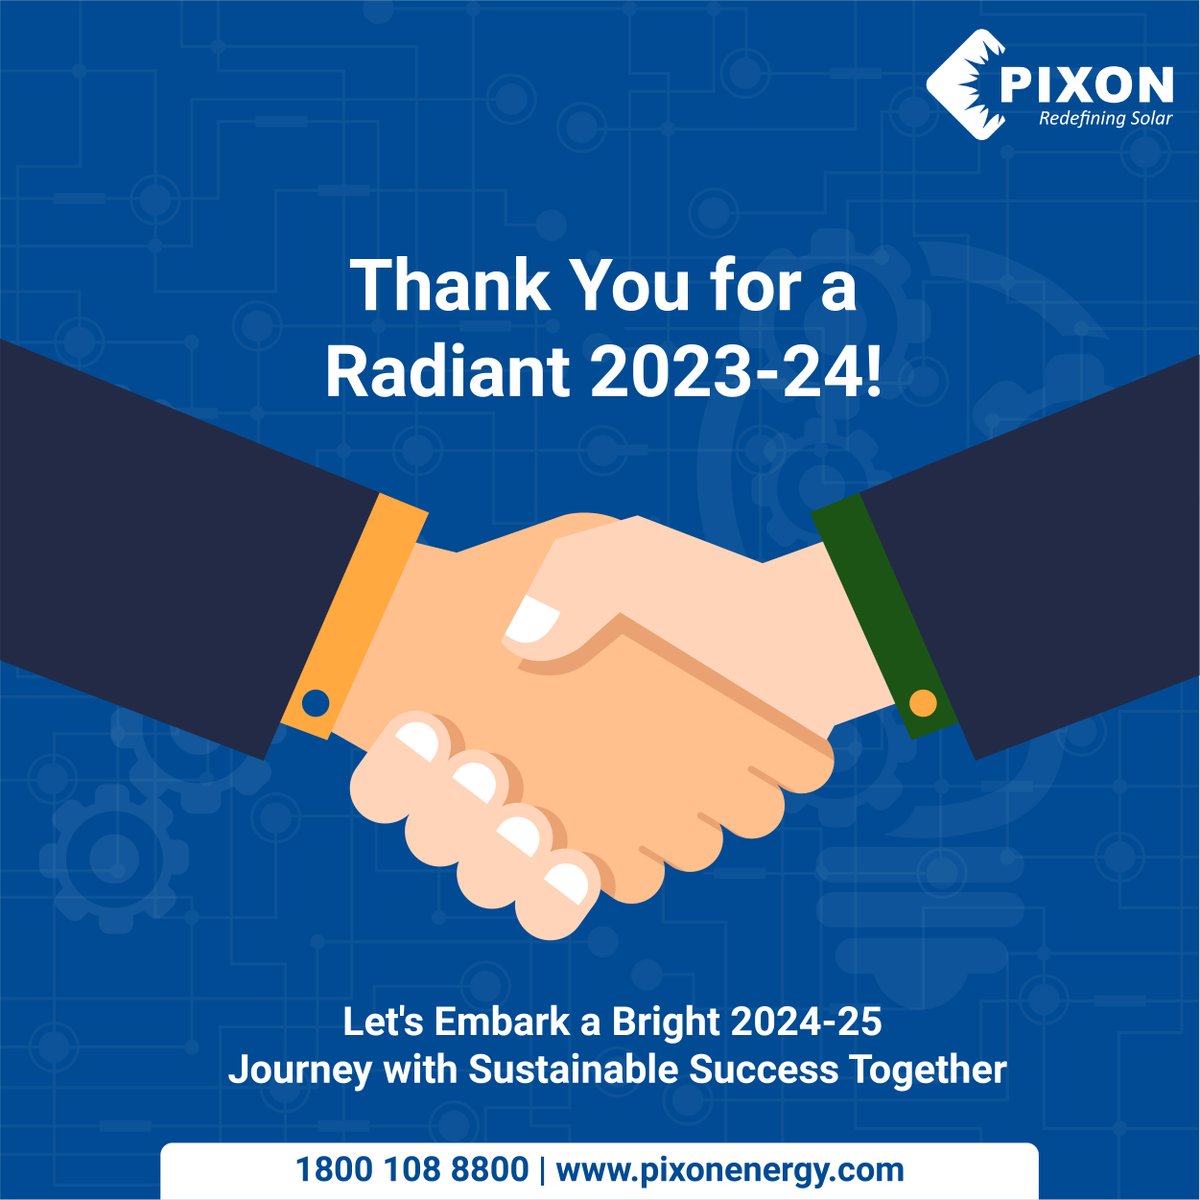 Looking back on a glowing 2023-2024, we're energized for an even brighter future! Let's journey into 2024-2025, powering our path with sustainable sunshine.

#pixonsolar #financialyear #solarpower #renewableenergy #modulemanufacturer #solarpanels #sustainablefuture #solarenergy